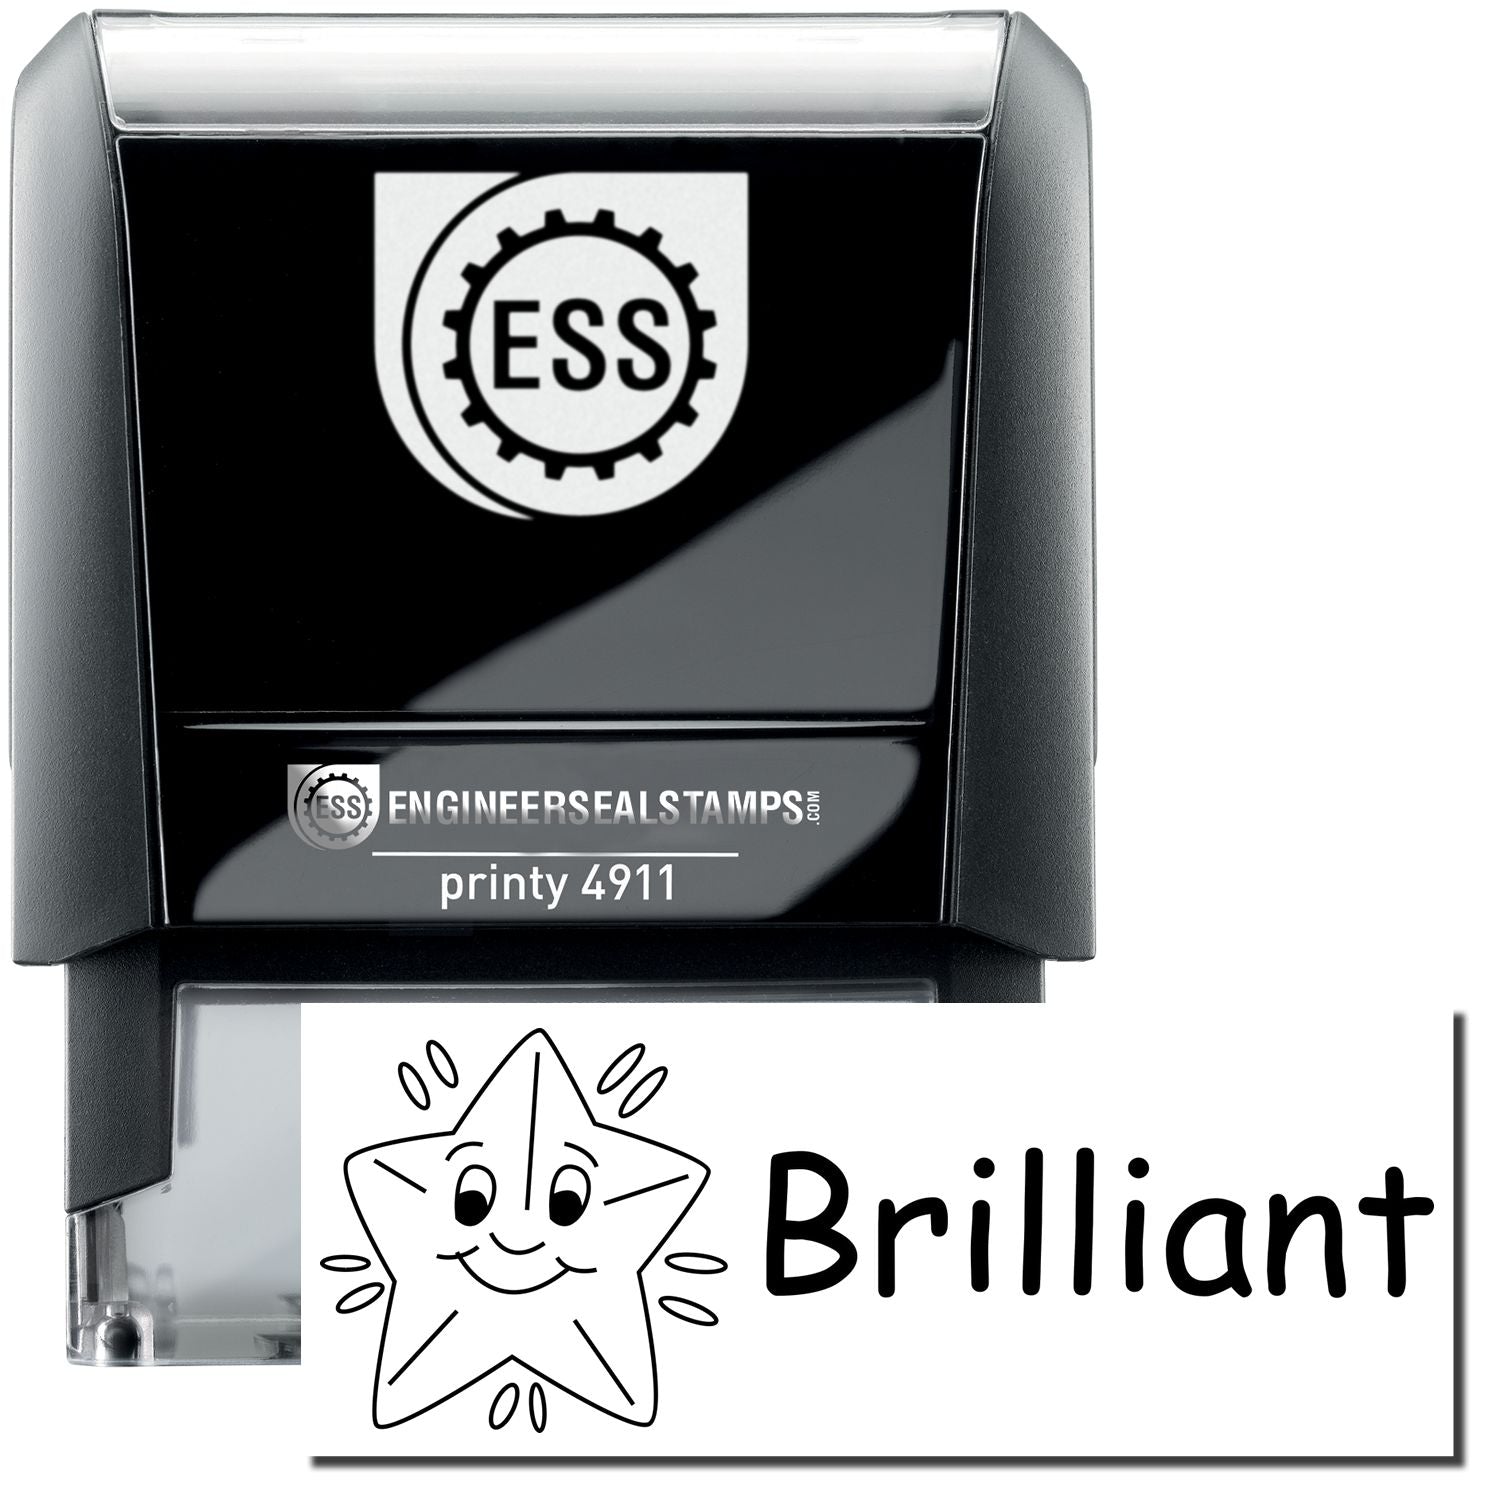 A self-inking stamp with a stamped image showing how the text "Brilliant" with a graphic of a shining star with a smile next to the text is displayed after stamping.